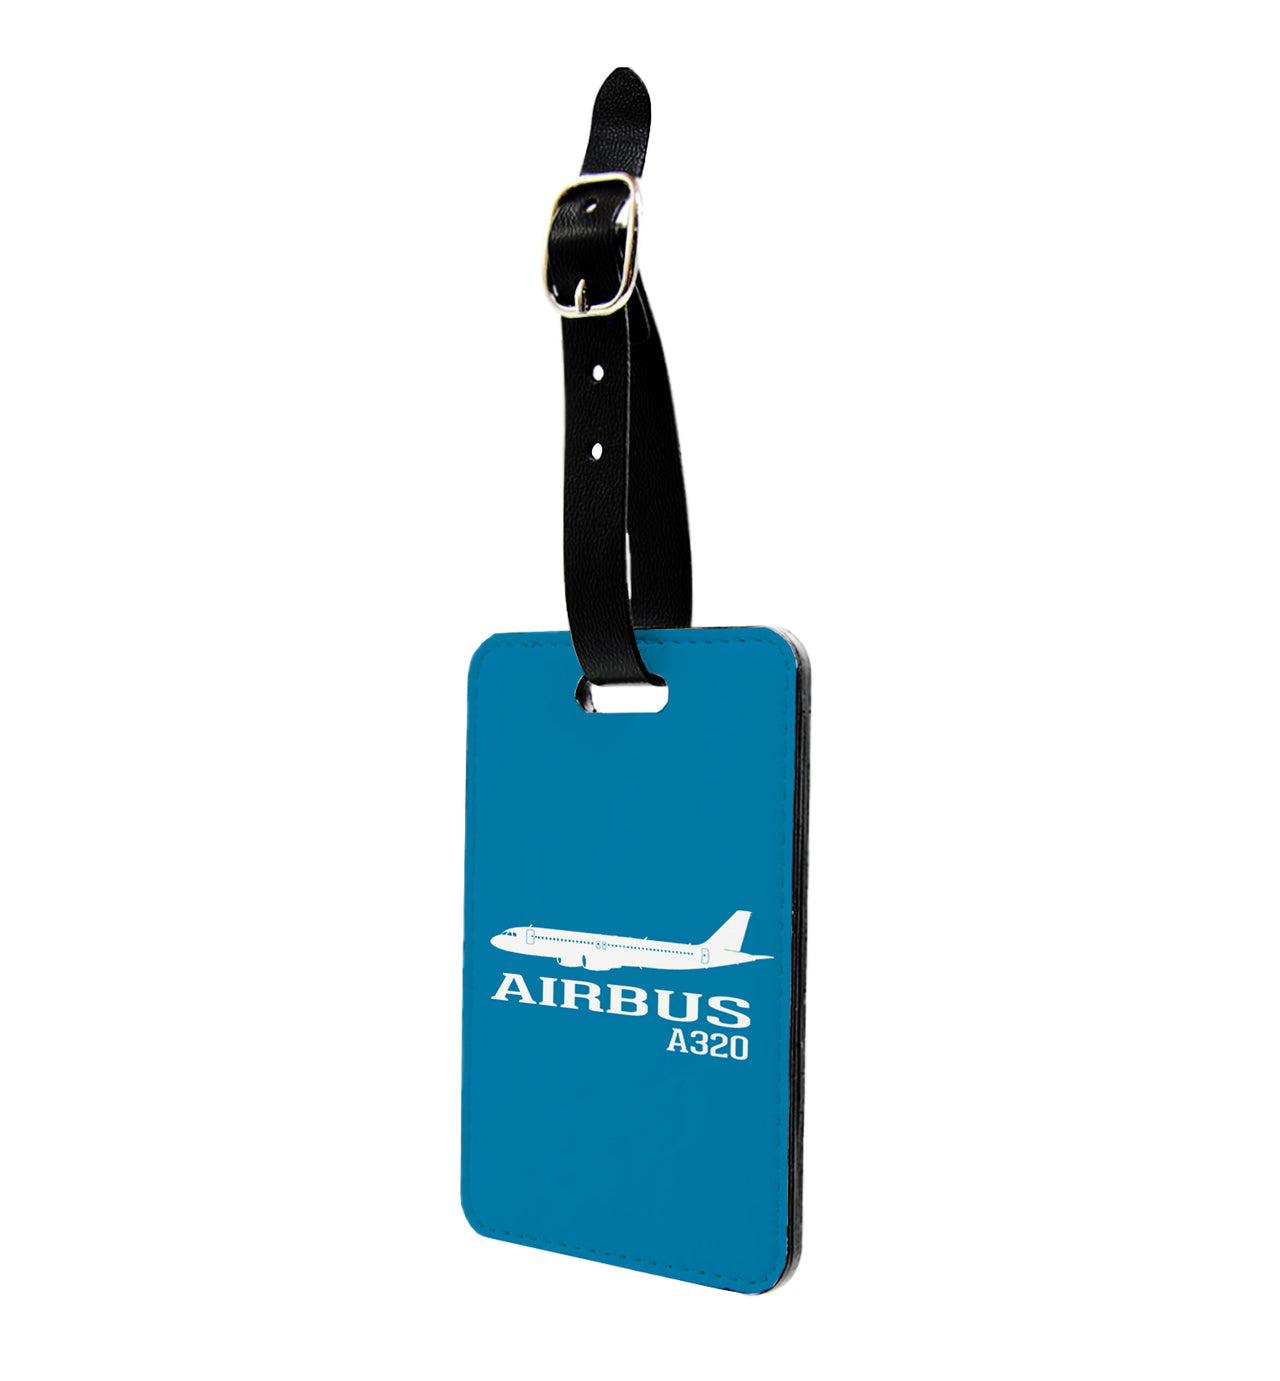 Airbus A320 Printed Designed Luggage Tag